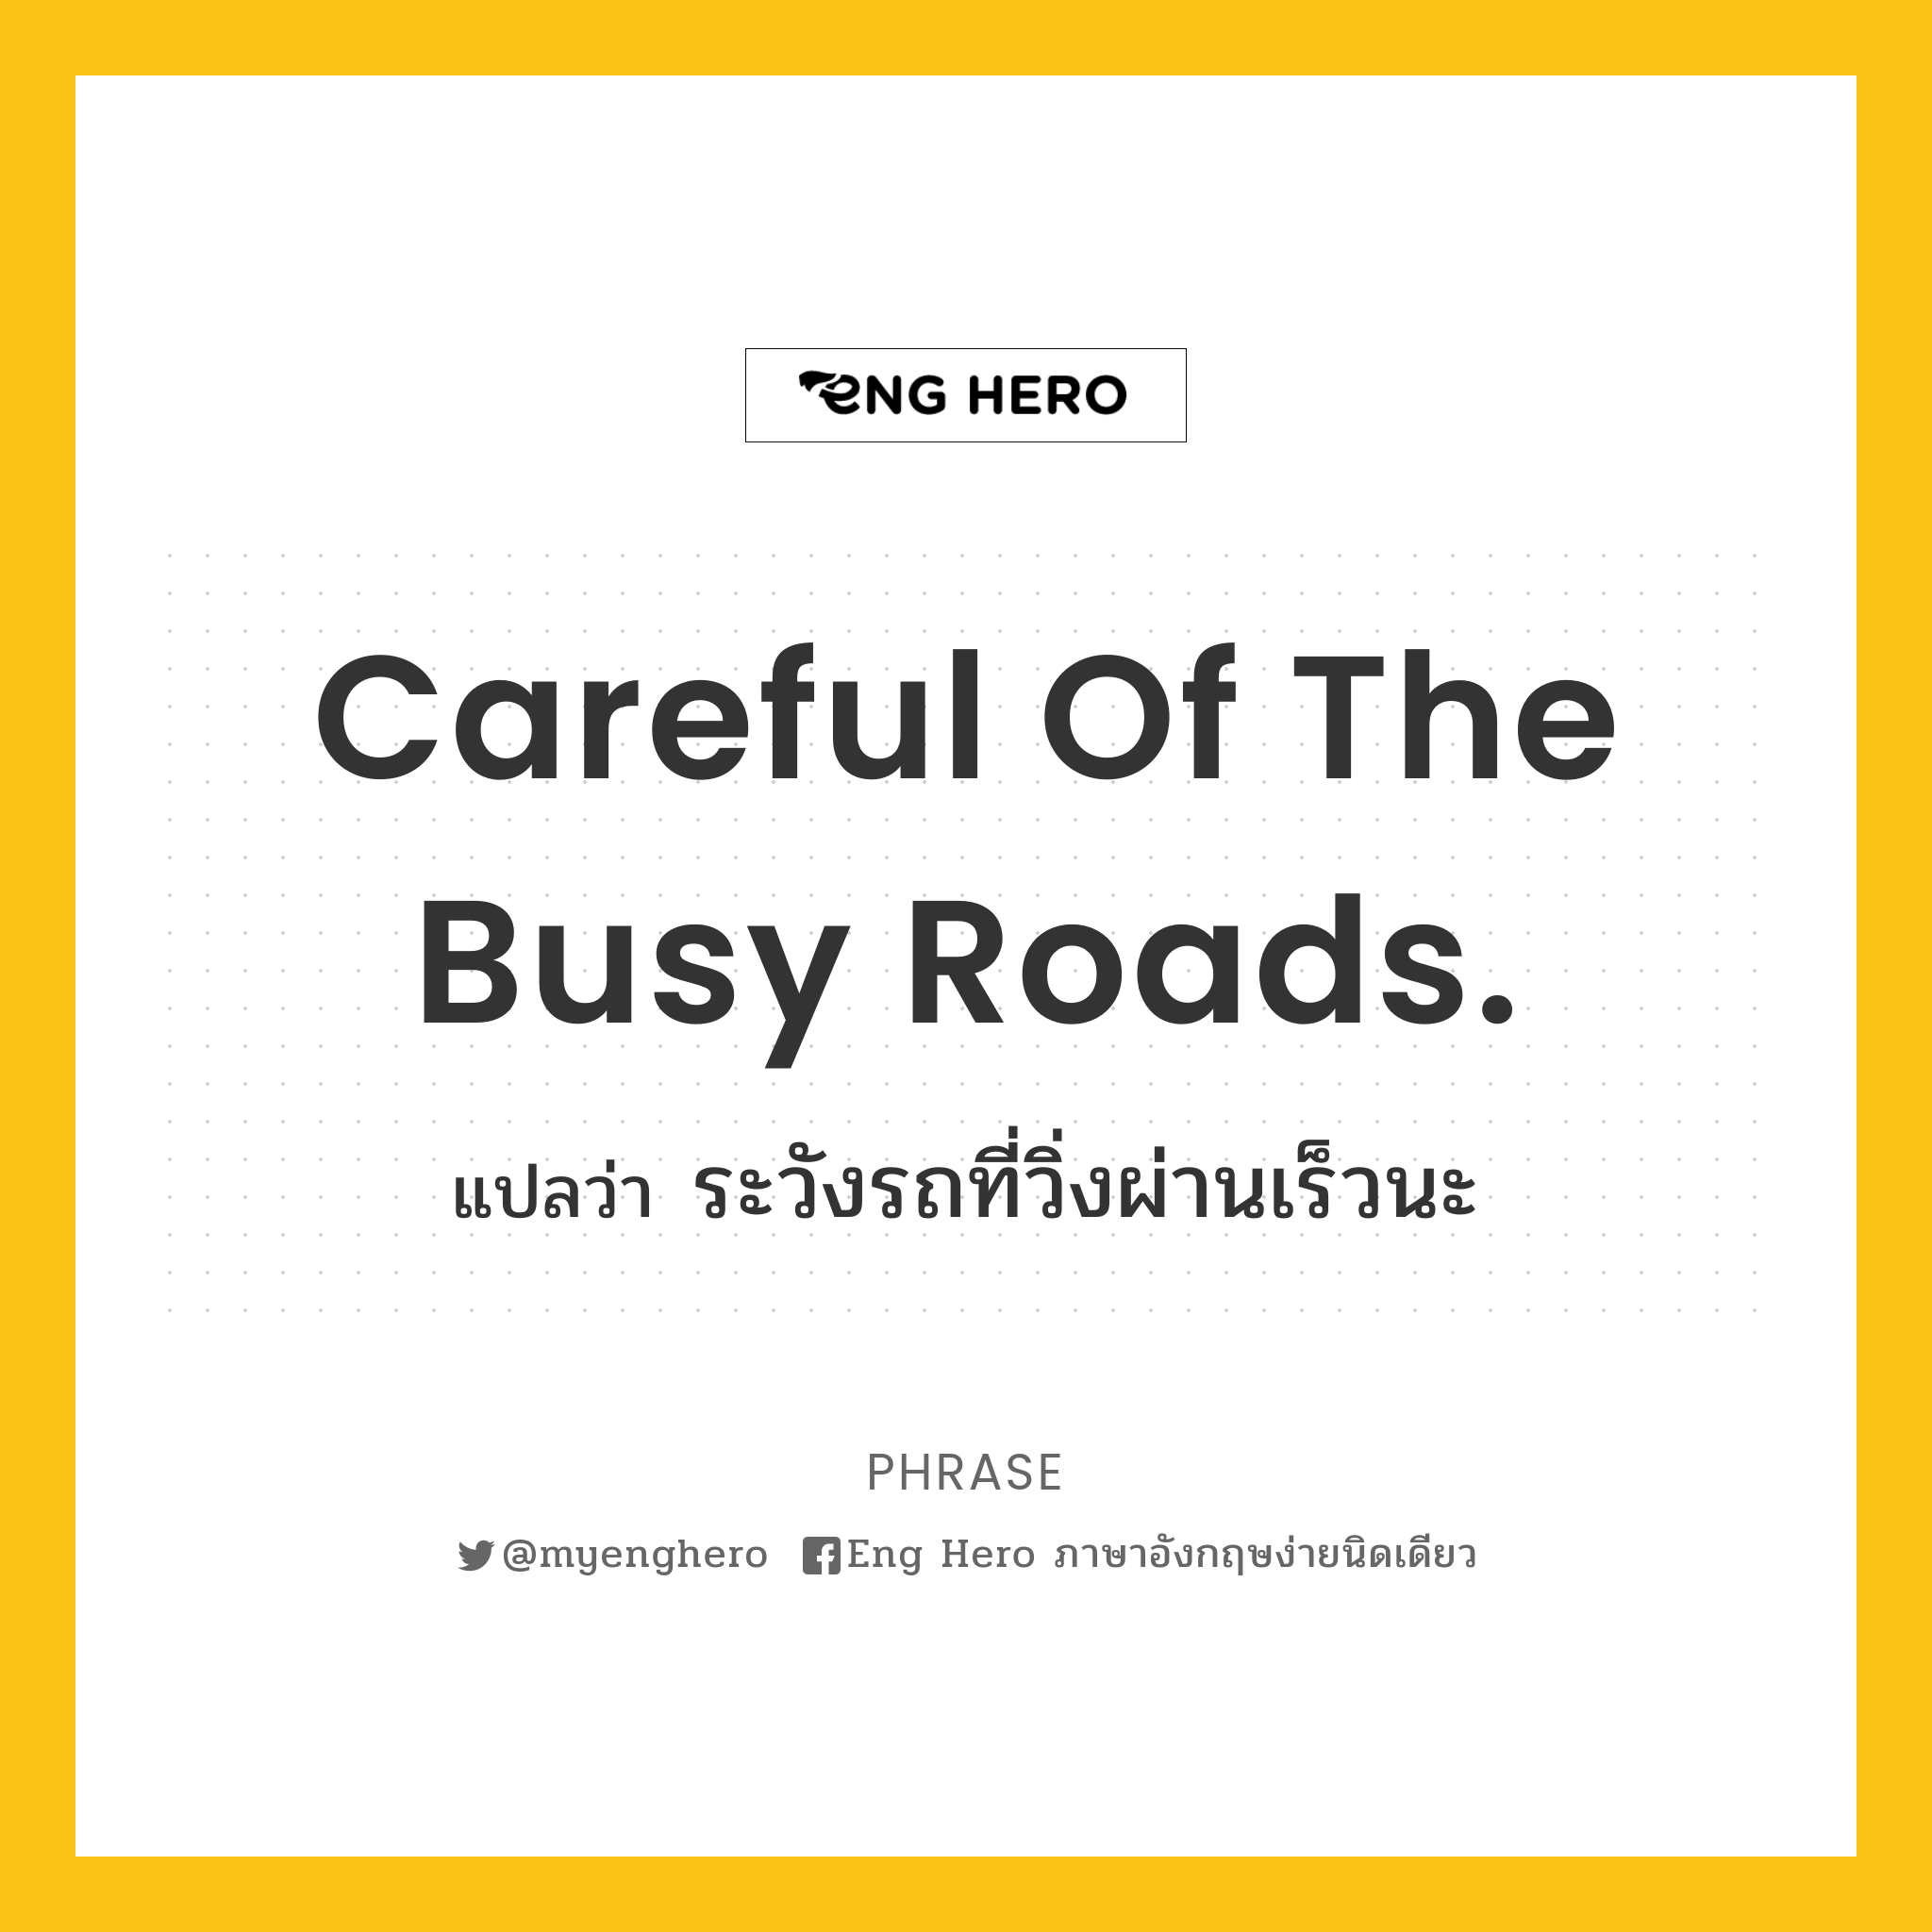 Careful of the busy roads.